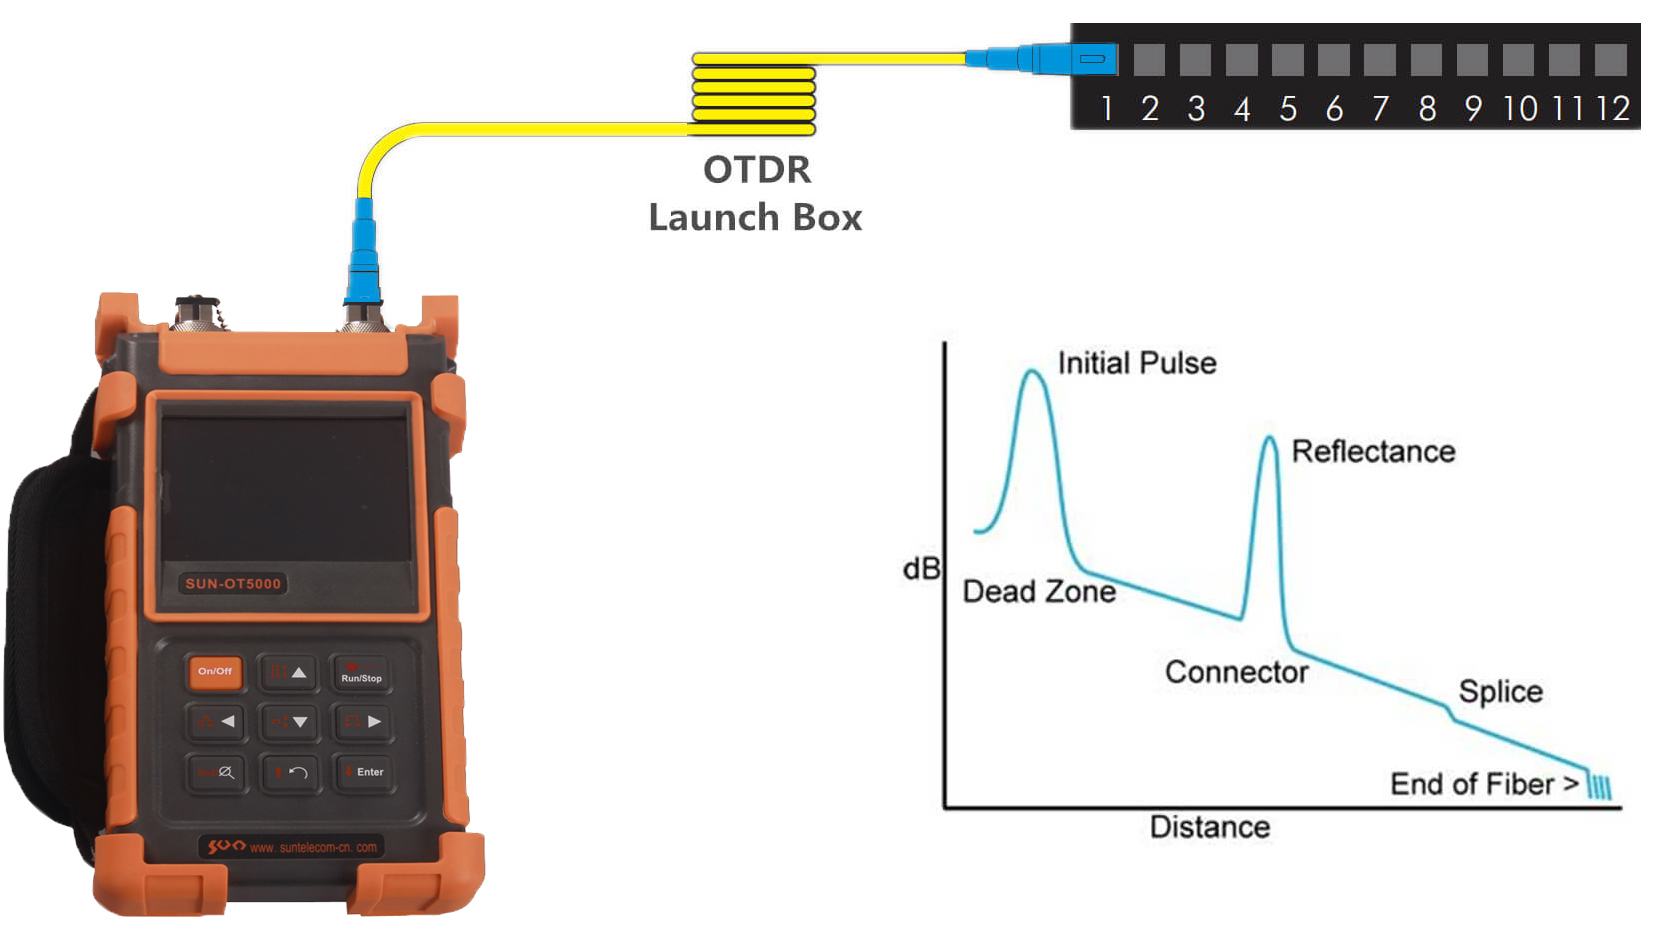 Why Do You Need OTDR Launch Box? 2